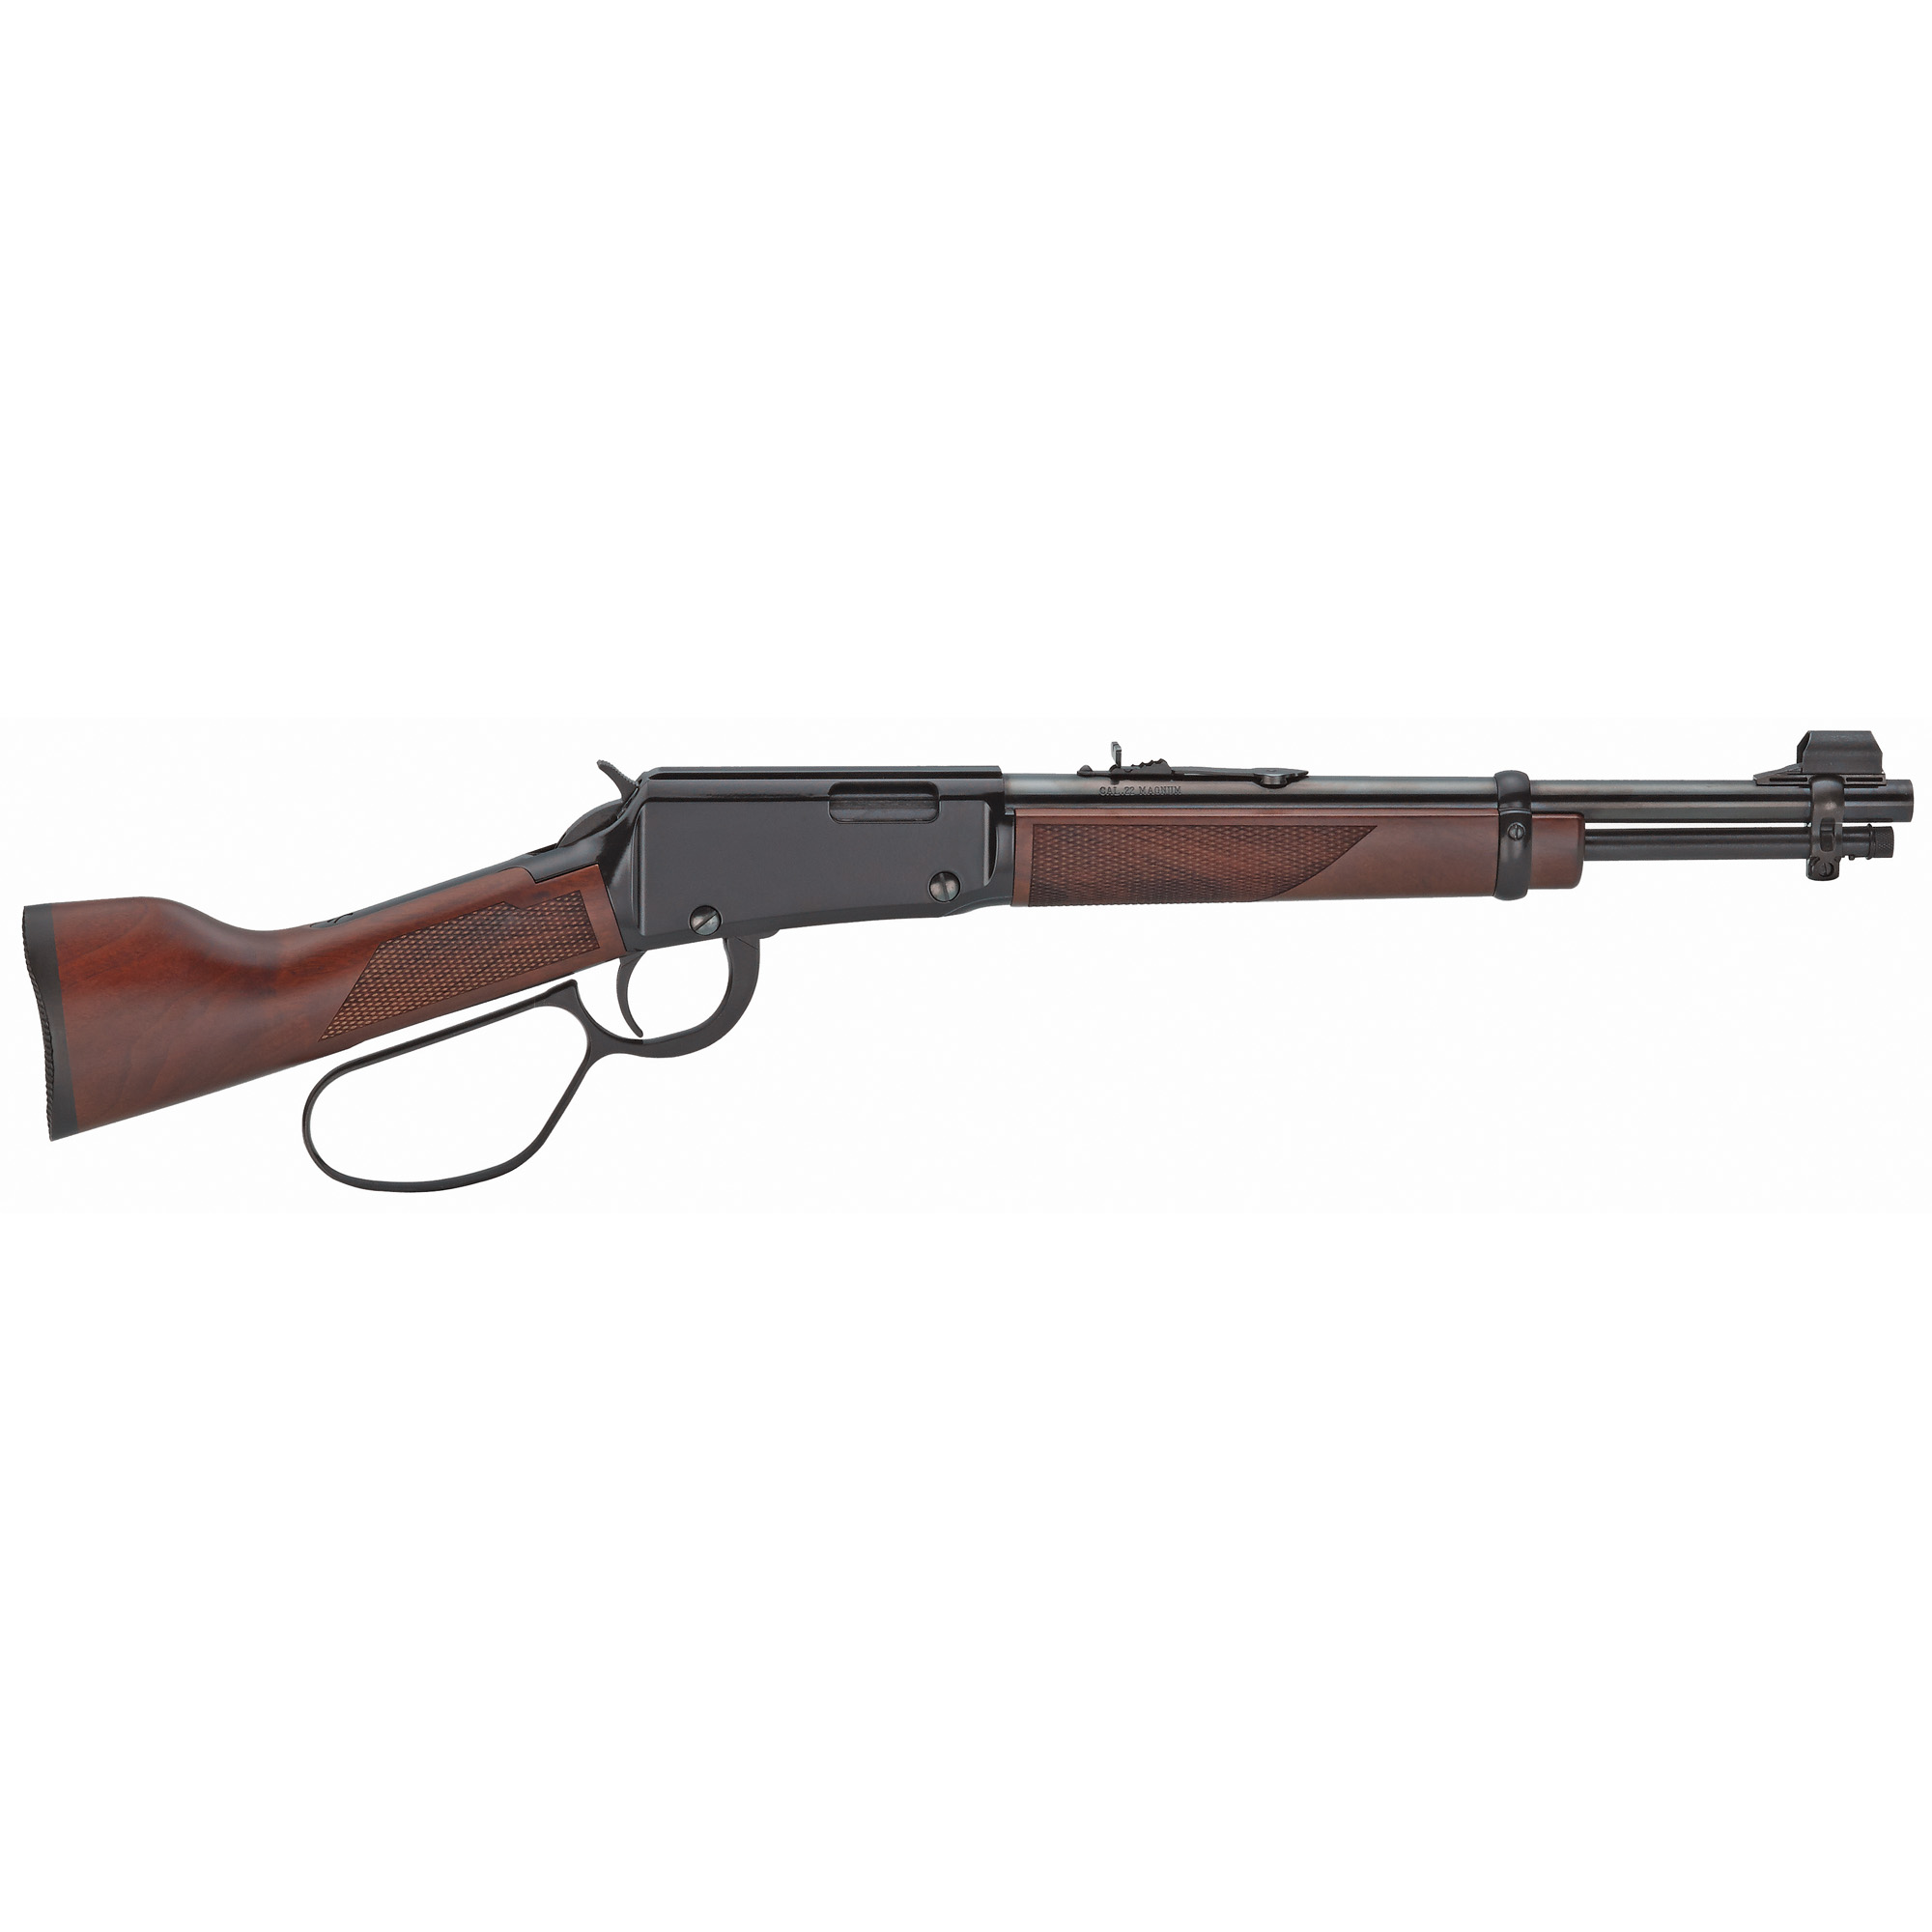 Henry Repeating Arms, Mare's Leg, Lever Action Pistol, 22WMR, 12.875" Barrel, Black, Walnut Grip, Adjustable Sights, 9 Rounds